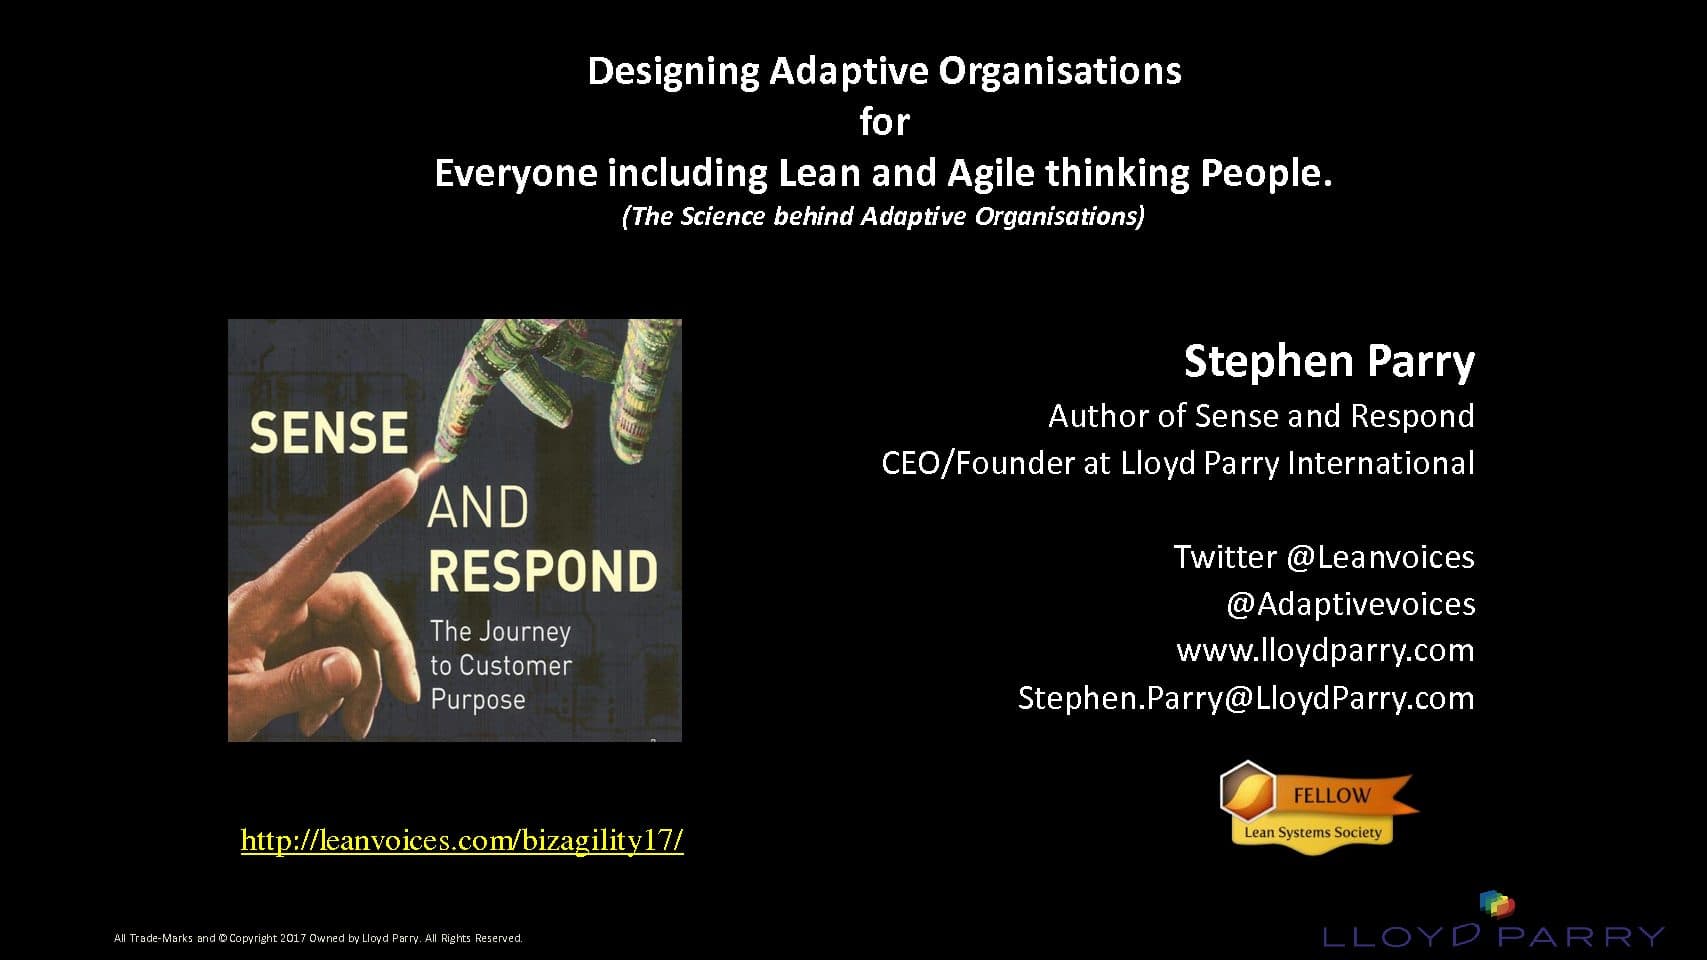 Designing Organizations That Work for Lean and Agile Thinking People